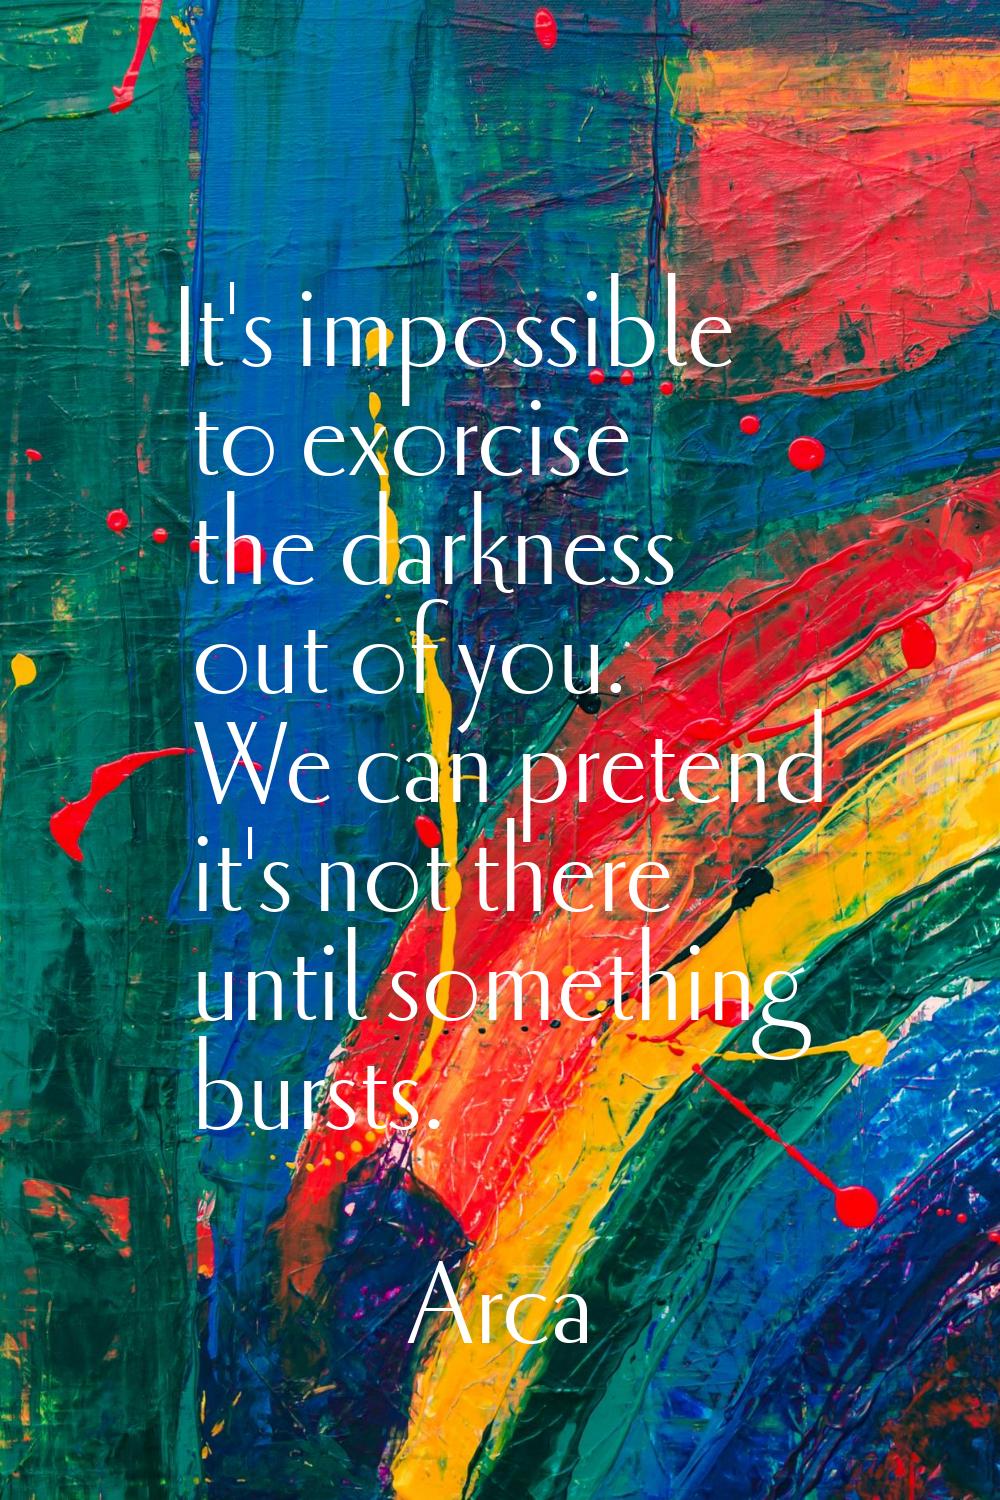 It's impossible to exorcise the darkness out of you. We can pretend it's not there until something 